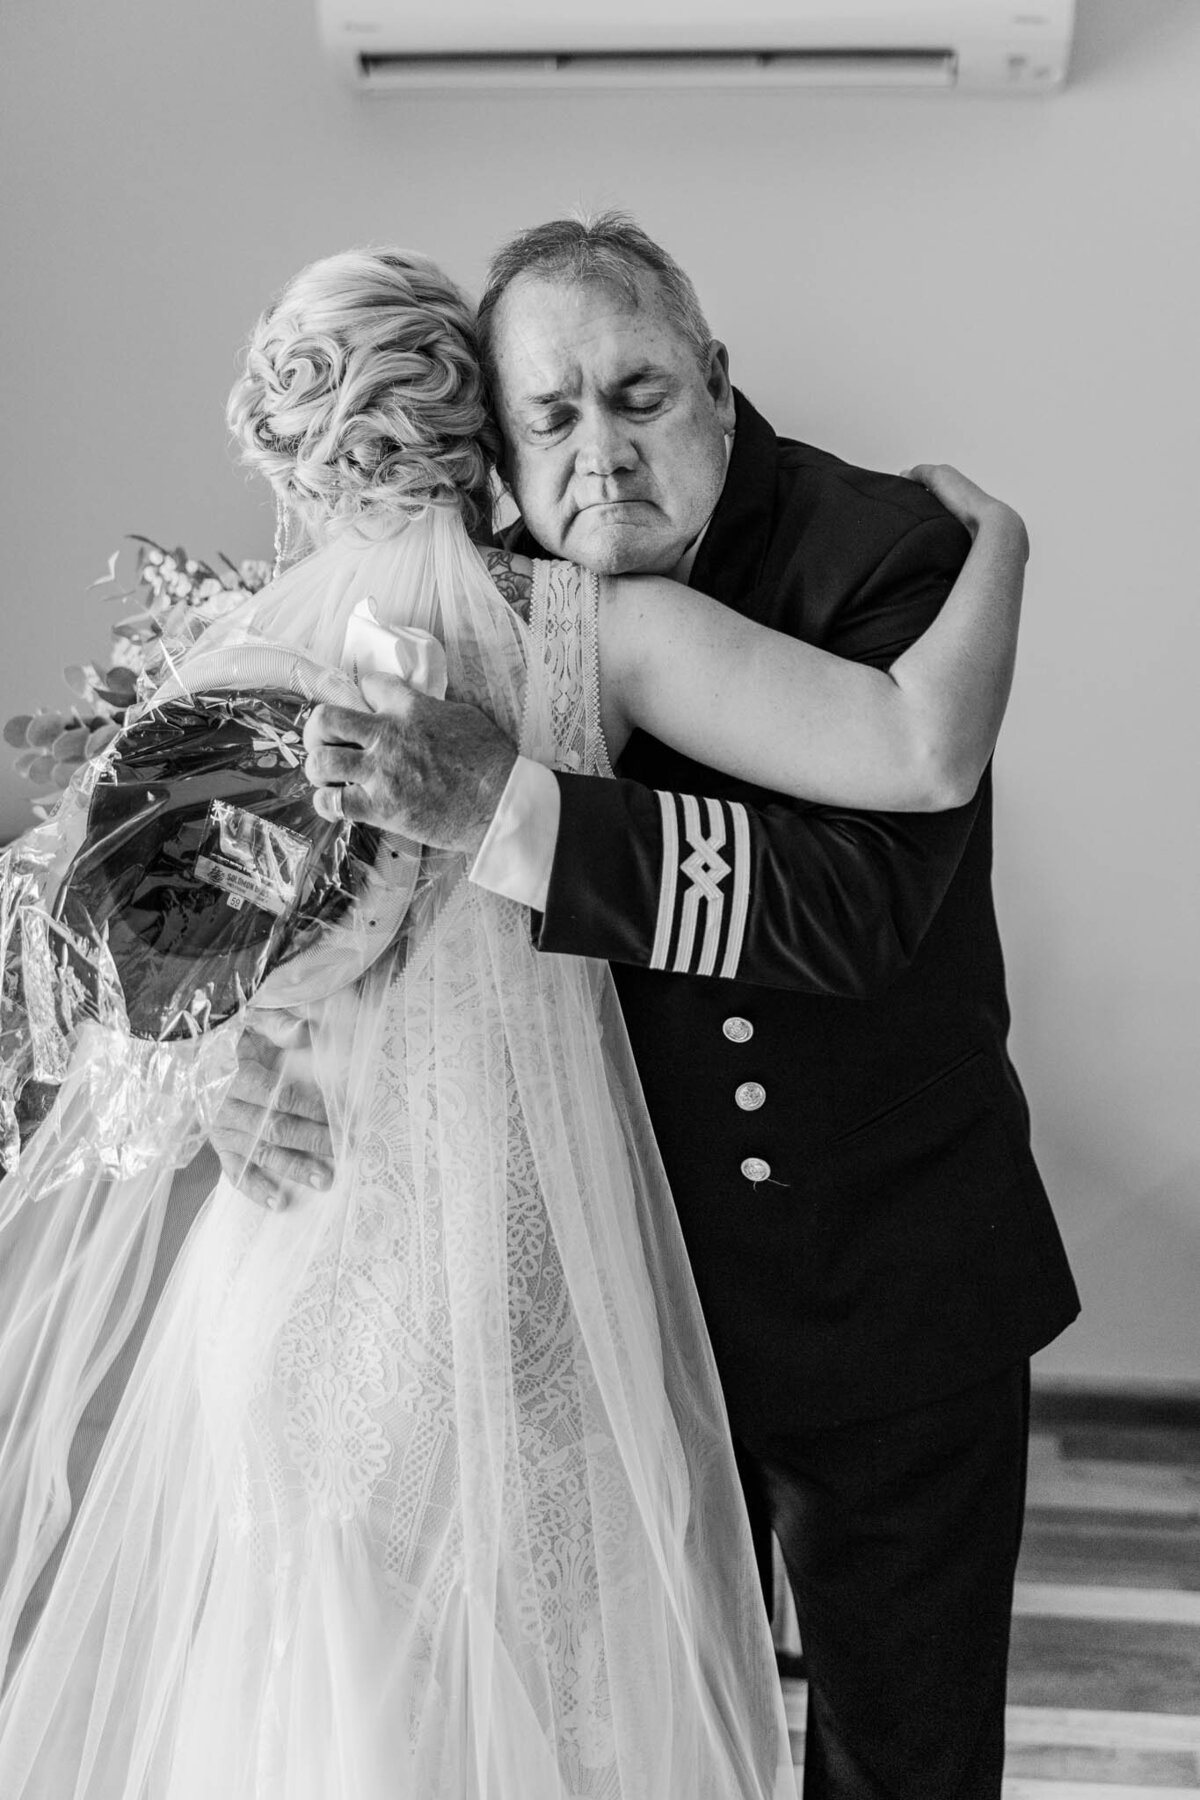 dad brought tears seeing his beautiful daughter on her wedding day